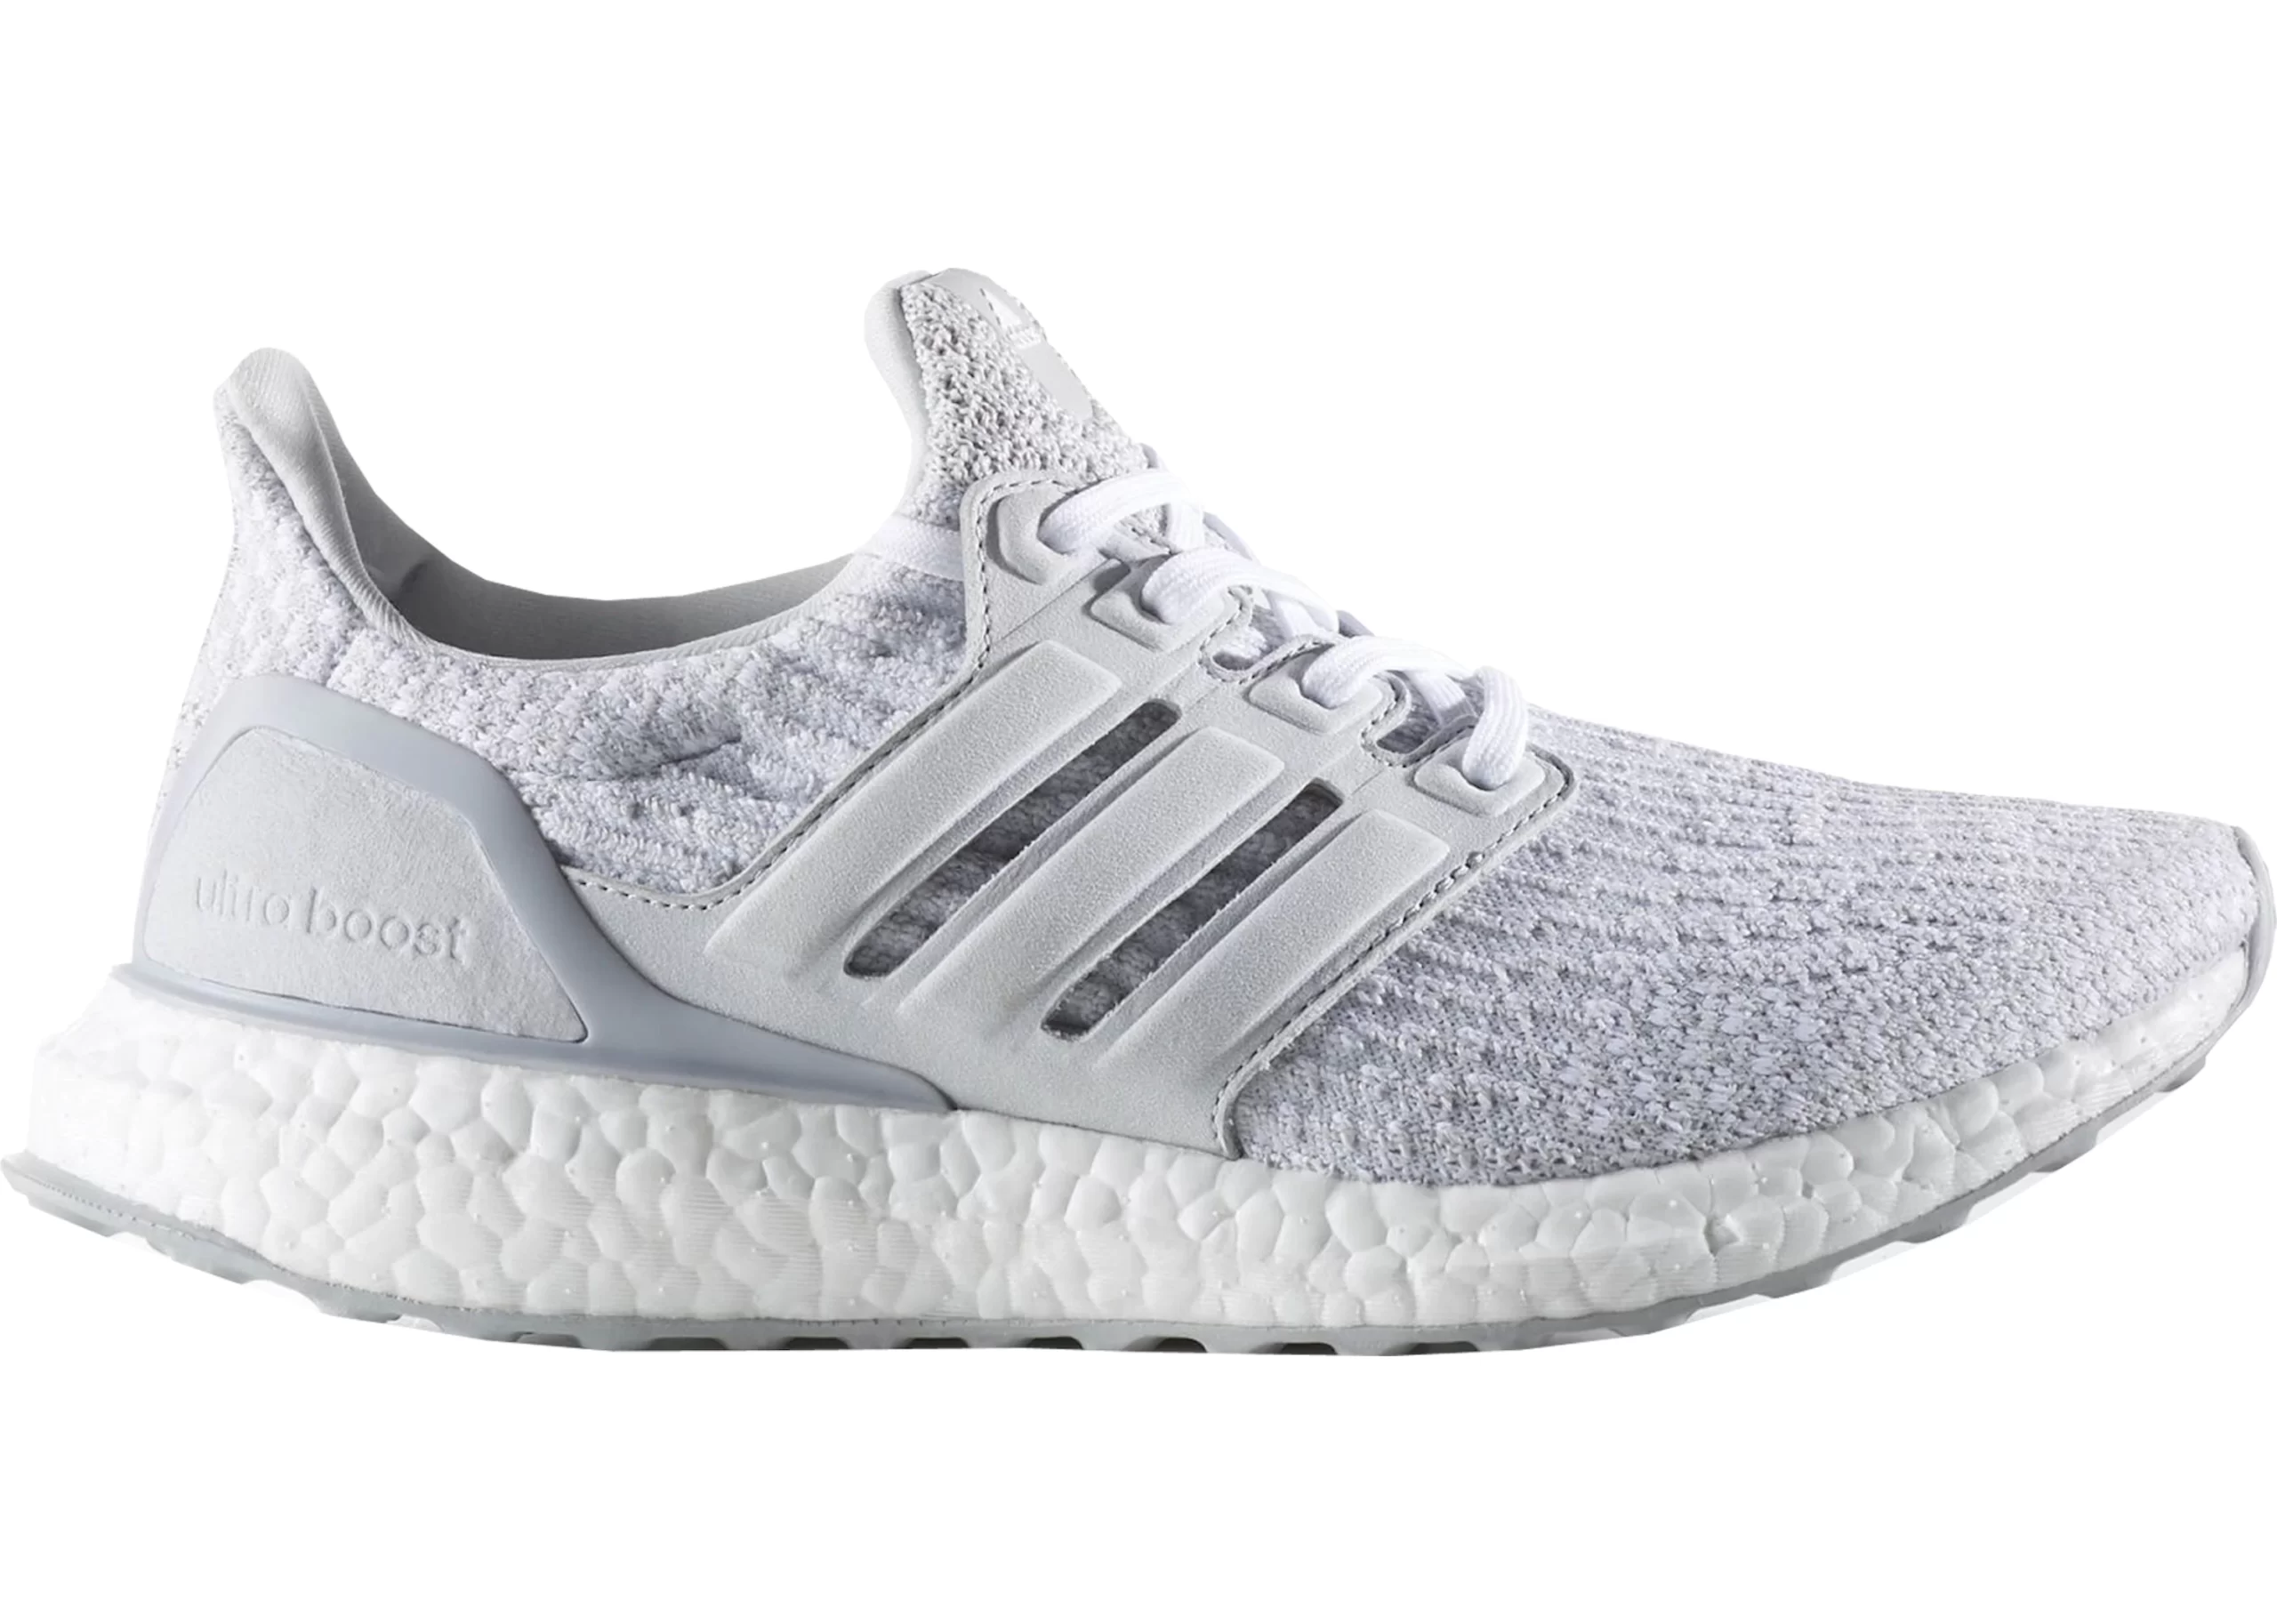 Adidas Ultra Boost 3.0 Reigning Champ Grey (women’s)